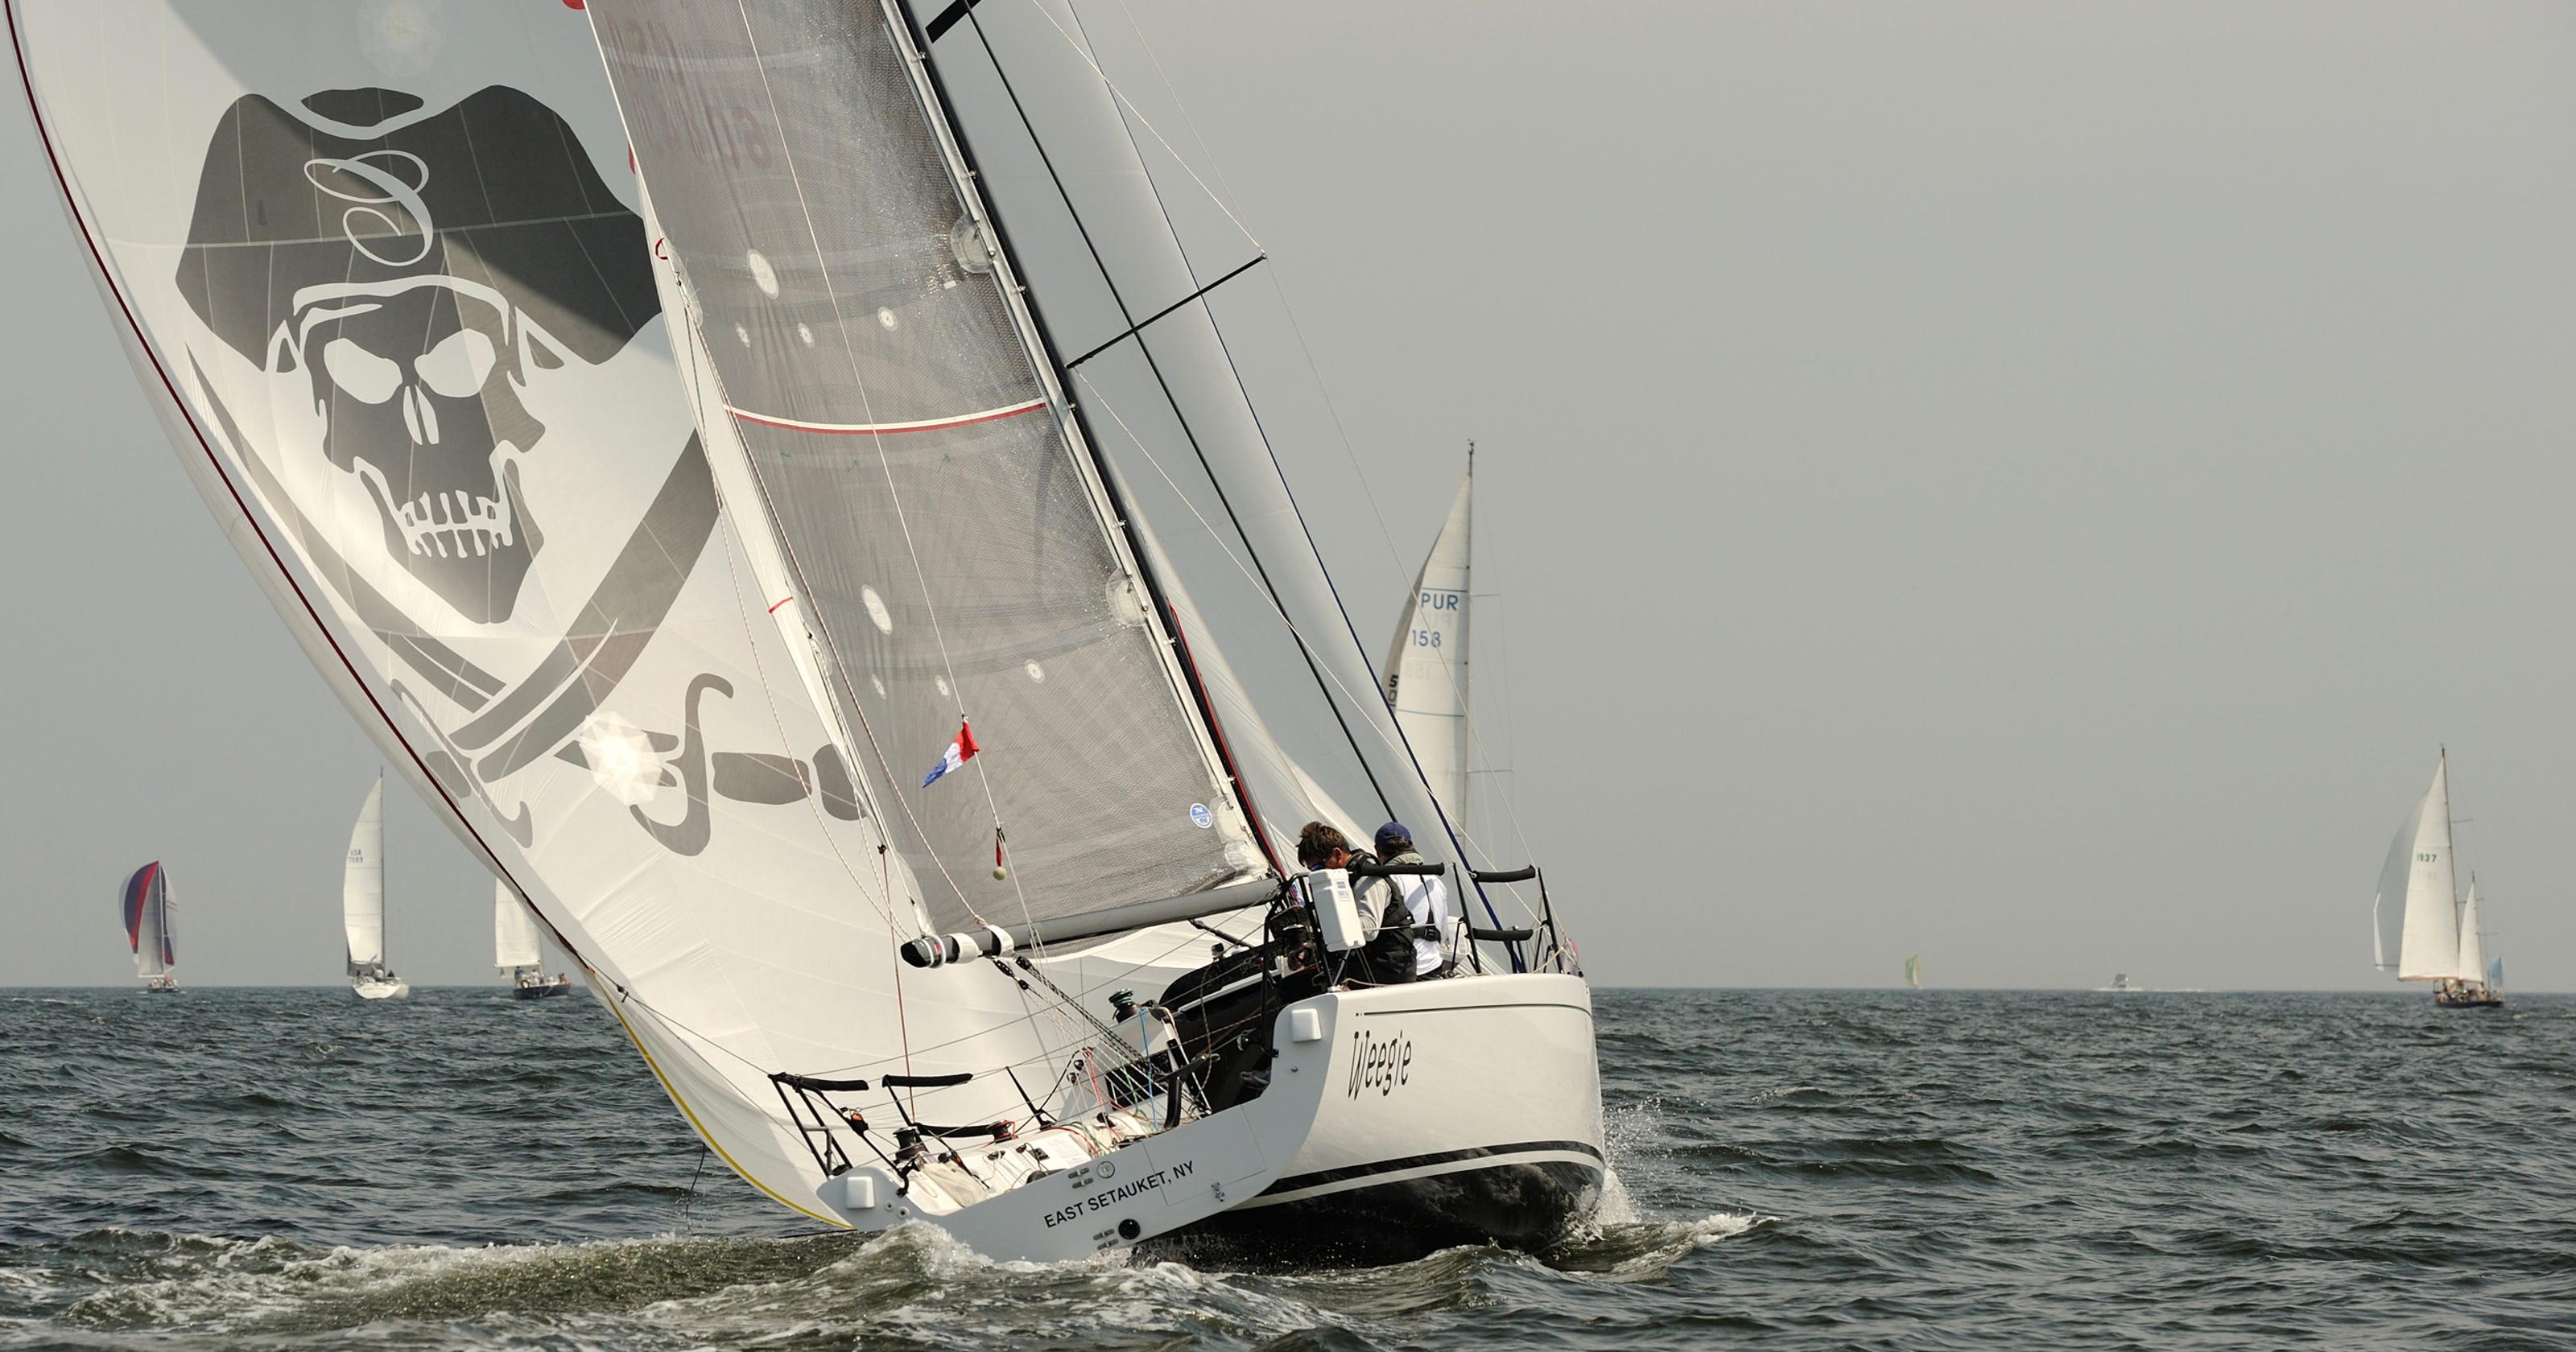 race sailboats for sale